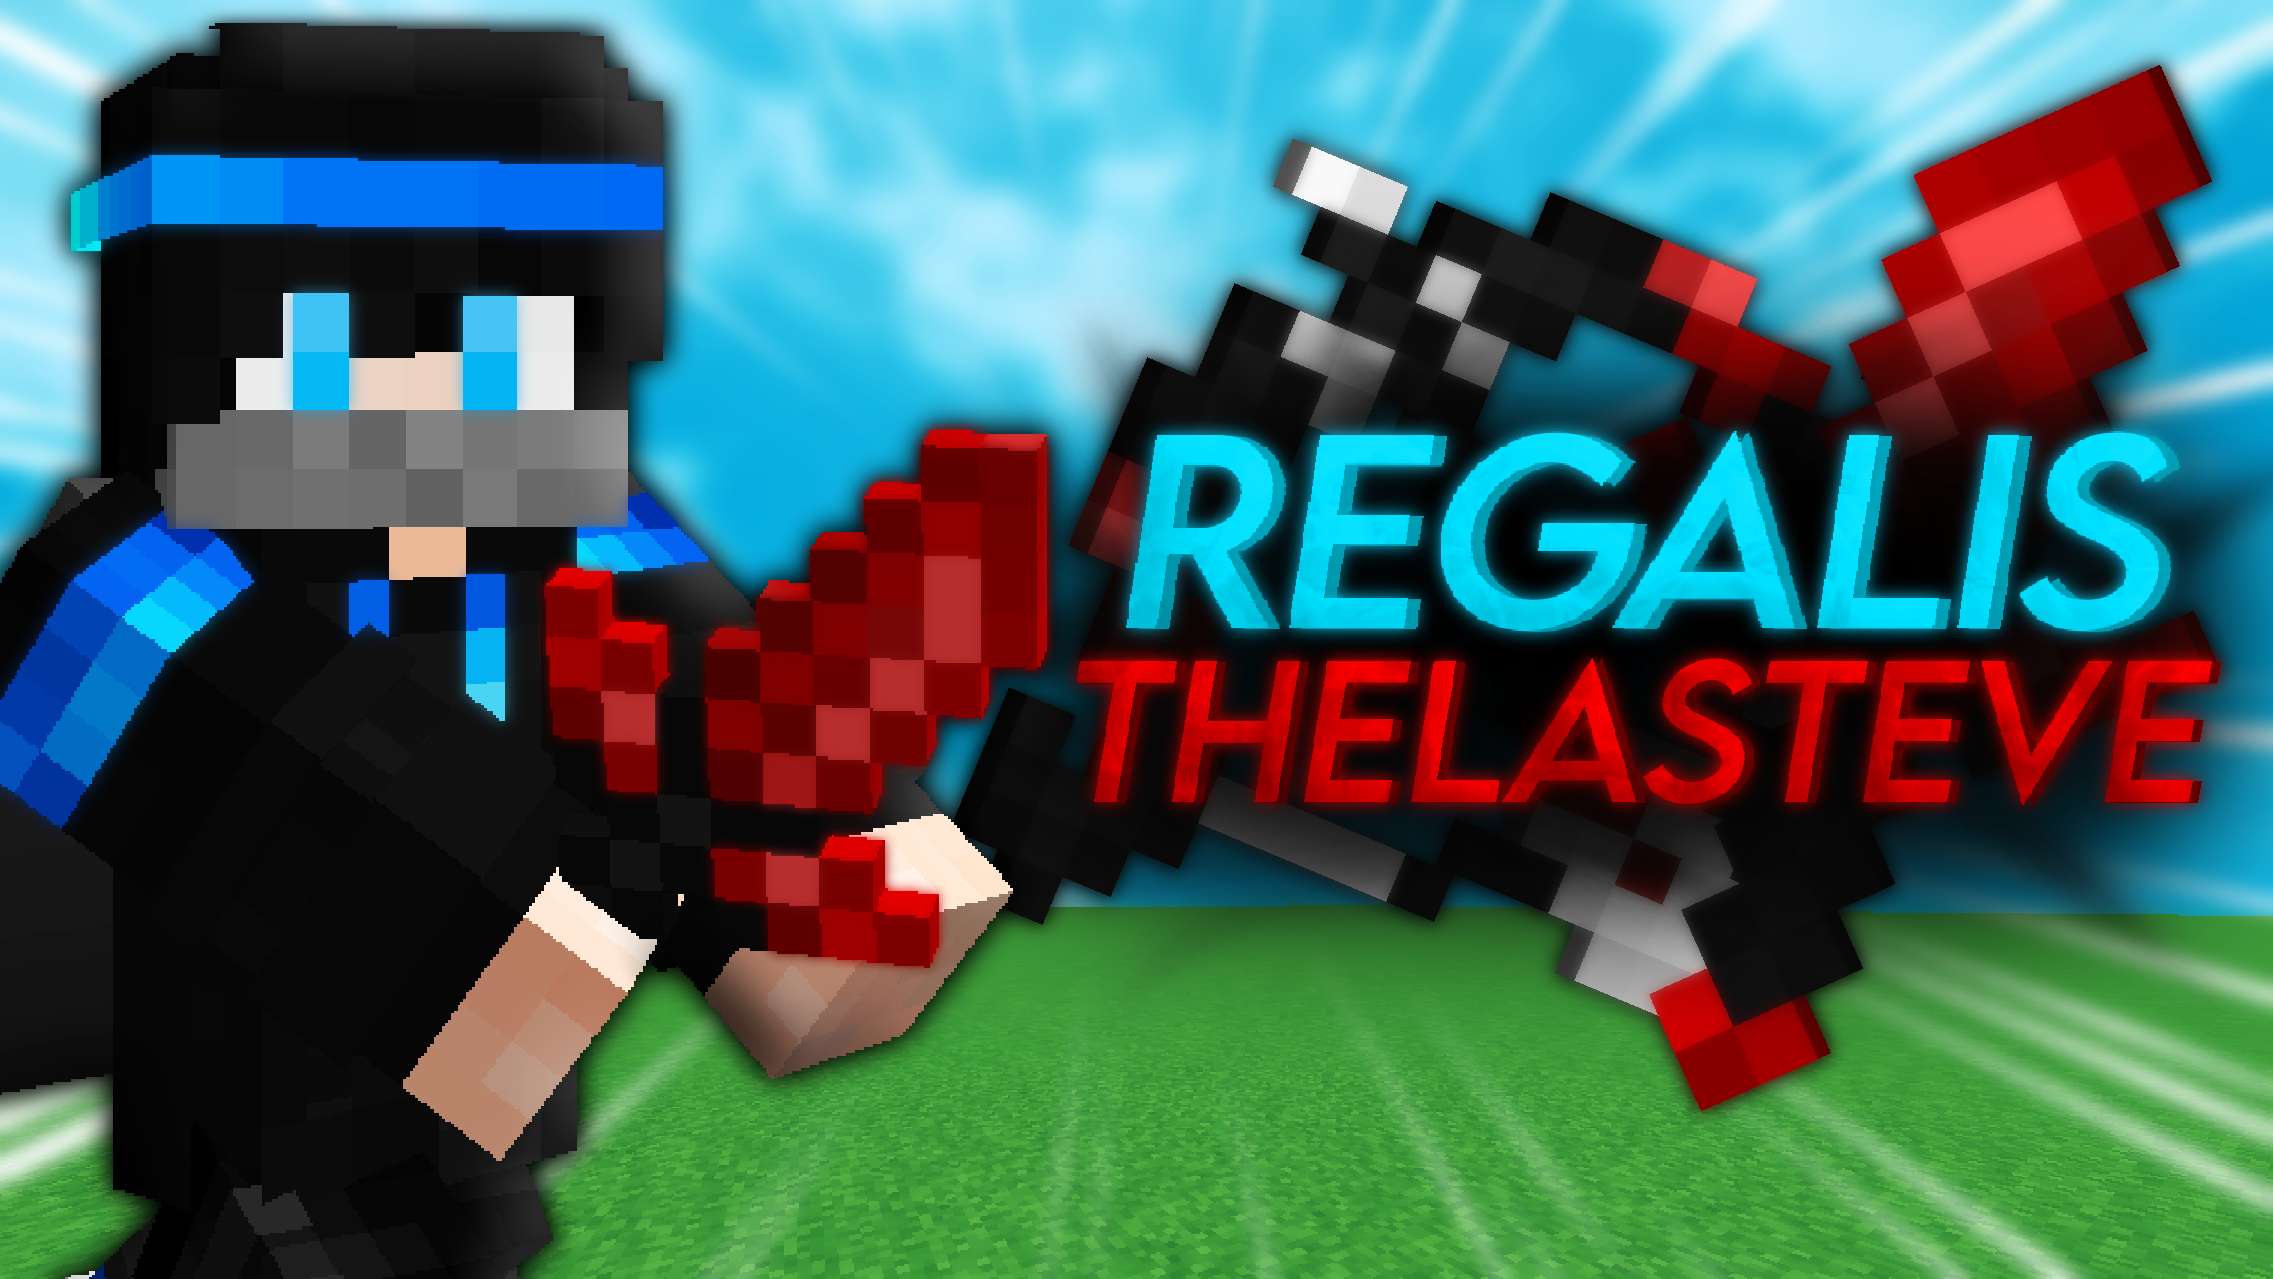 REGALIS - THELASTEVE [LONG SWORDS] 16 by Mqryo on PvPRP